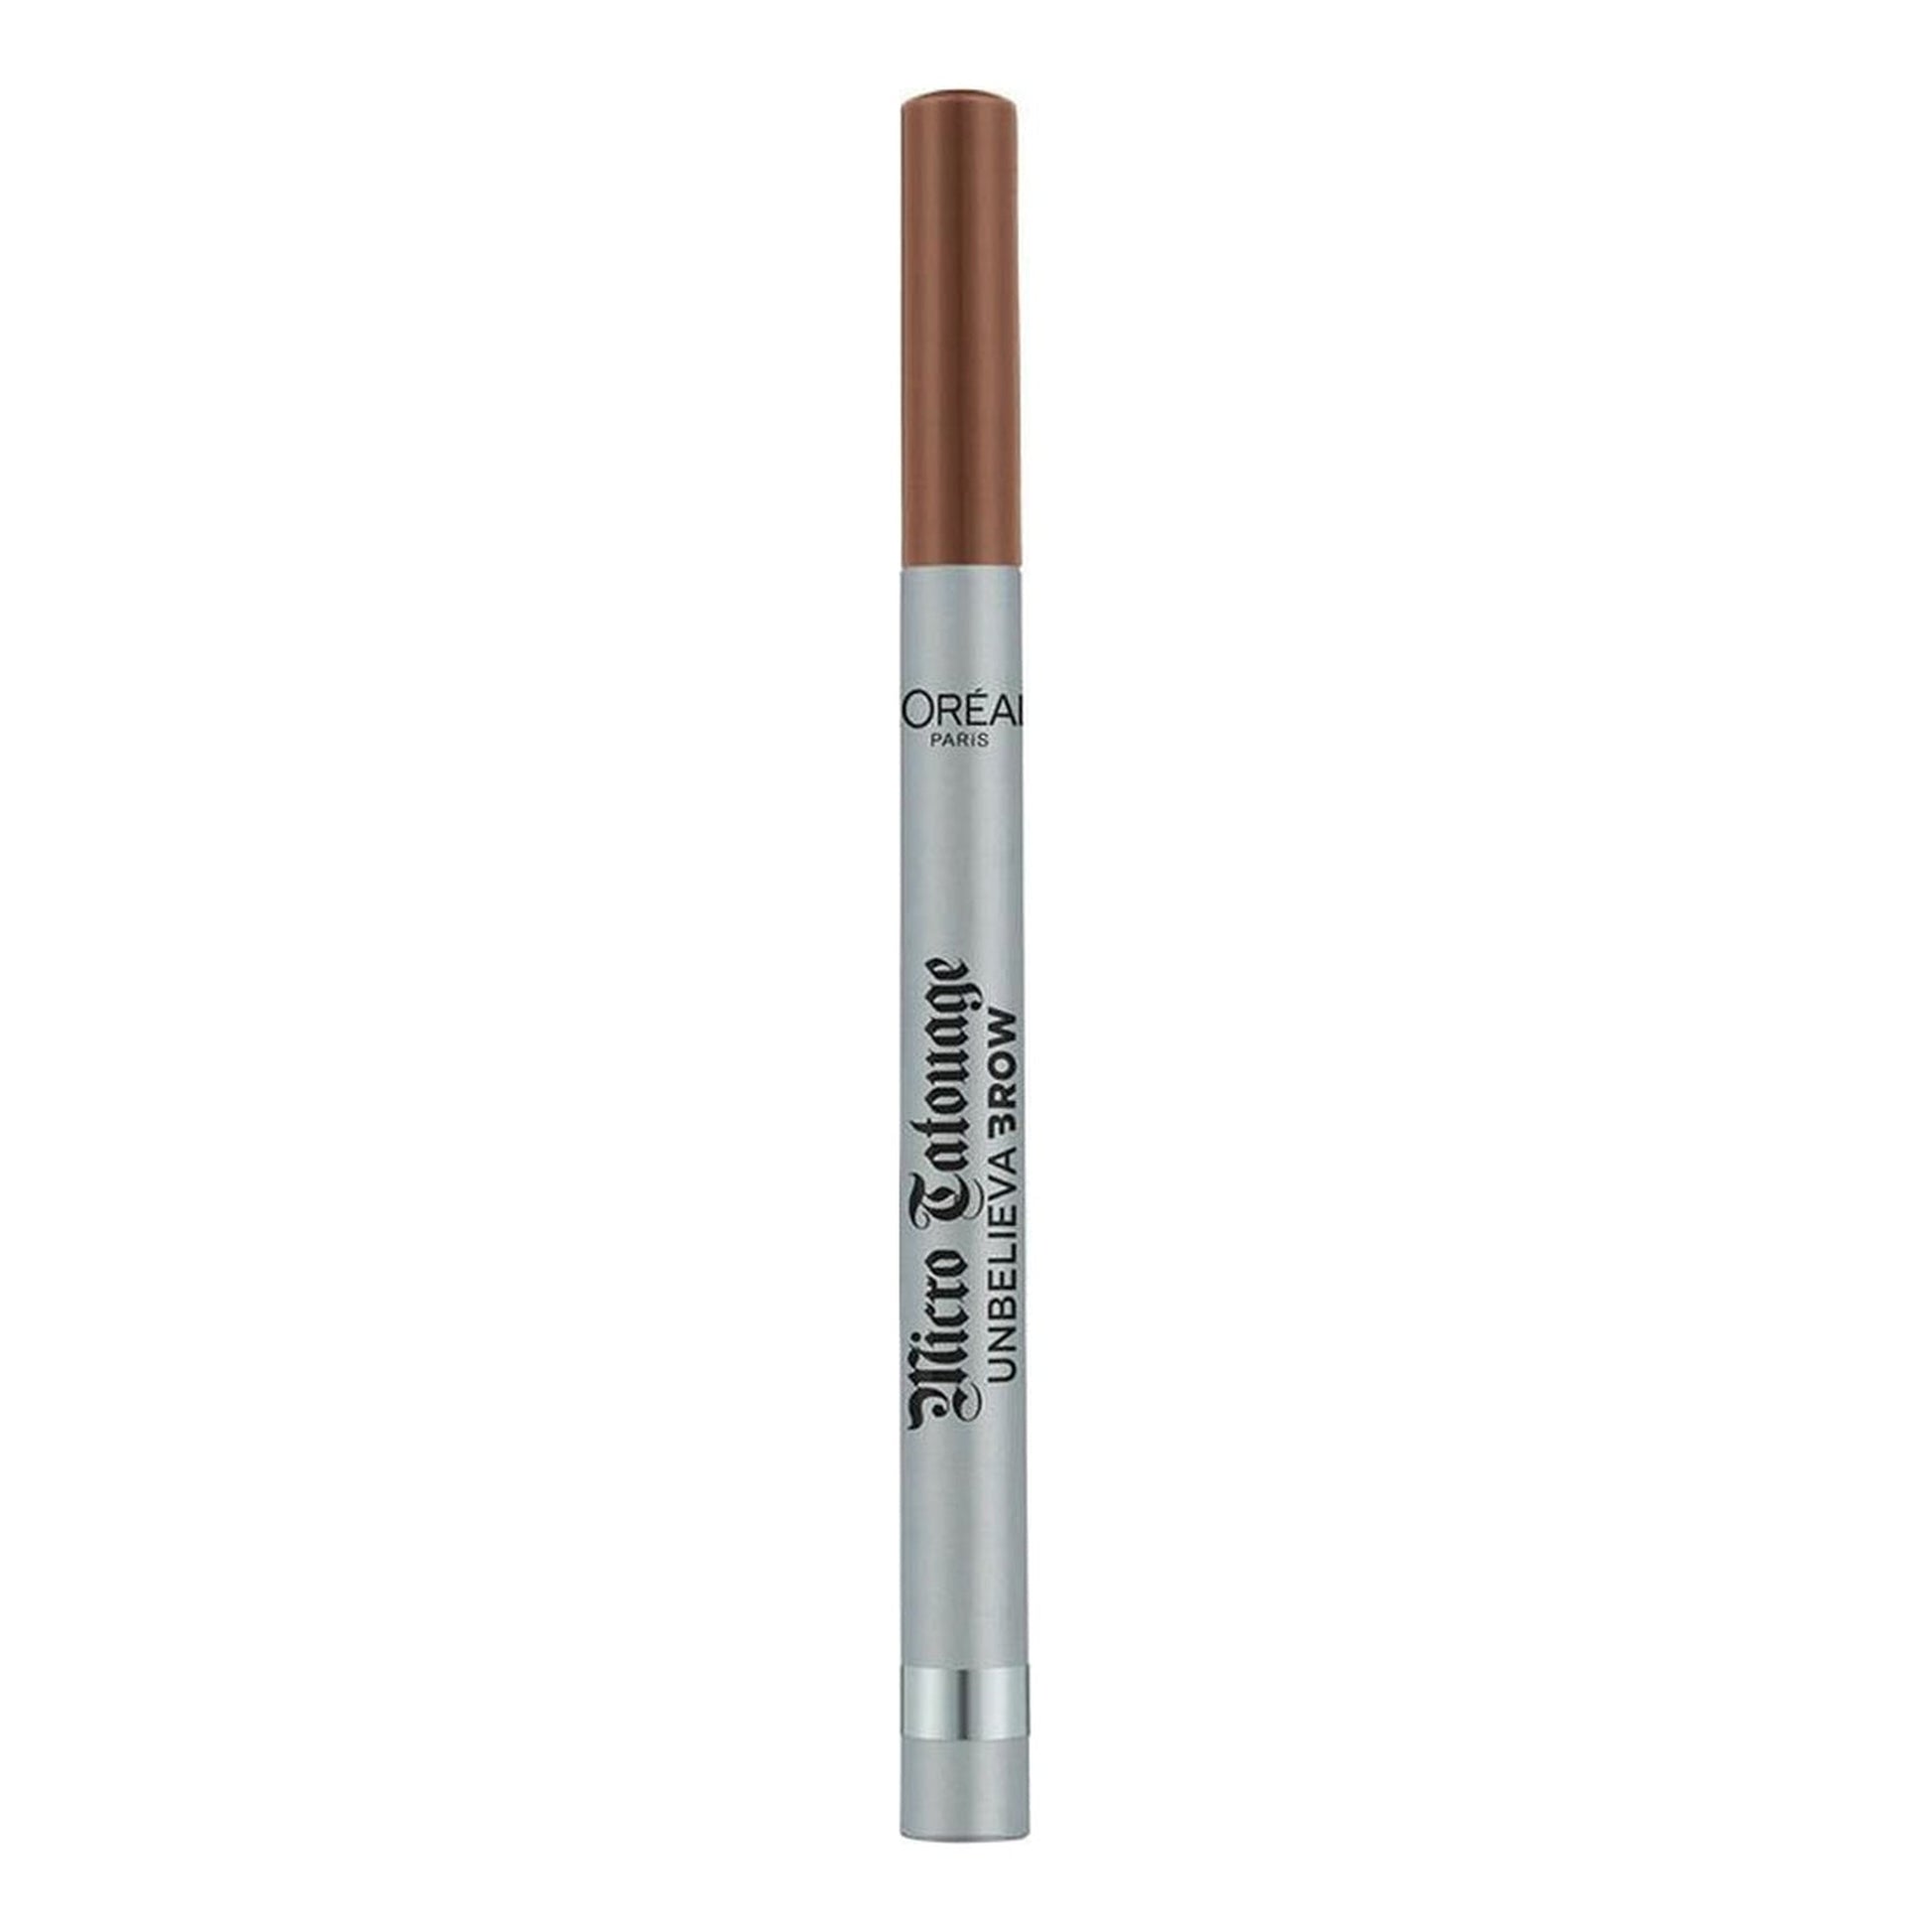 L'Oreal Brow Artist Micro Tatouage UNBELIEVABROW 105 Brunette-L'Oreal-BeautyNmakeup.co.uk